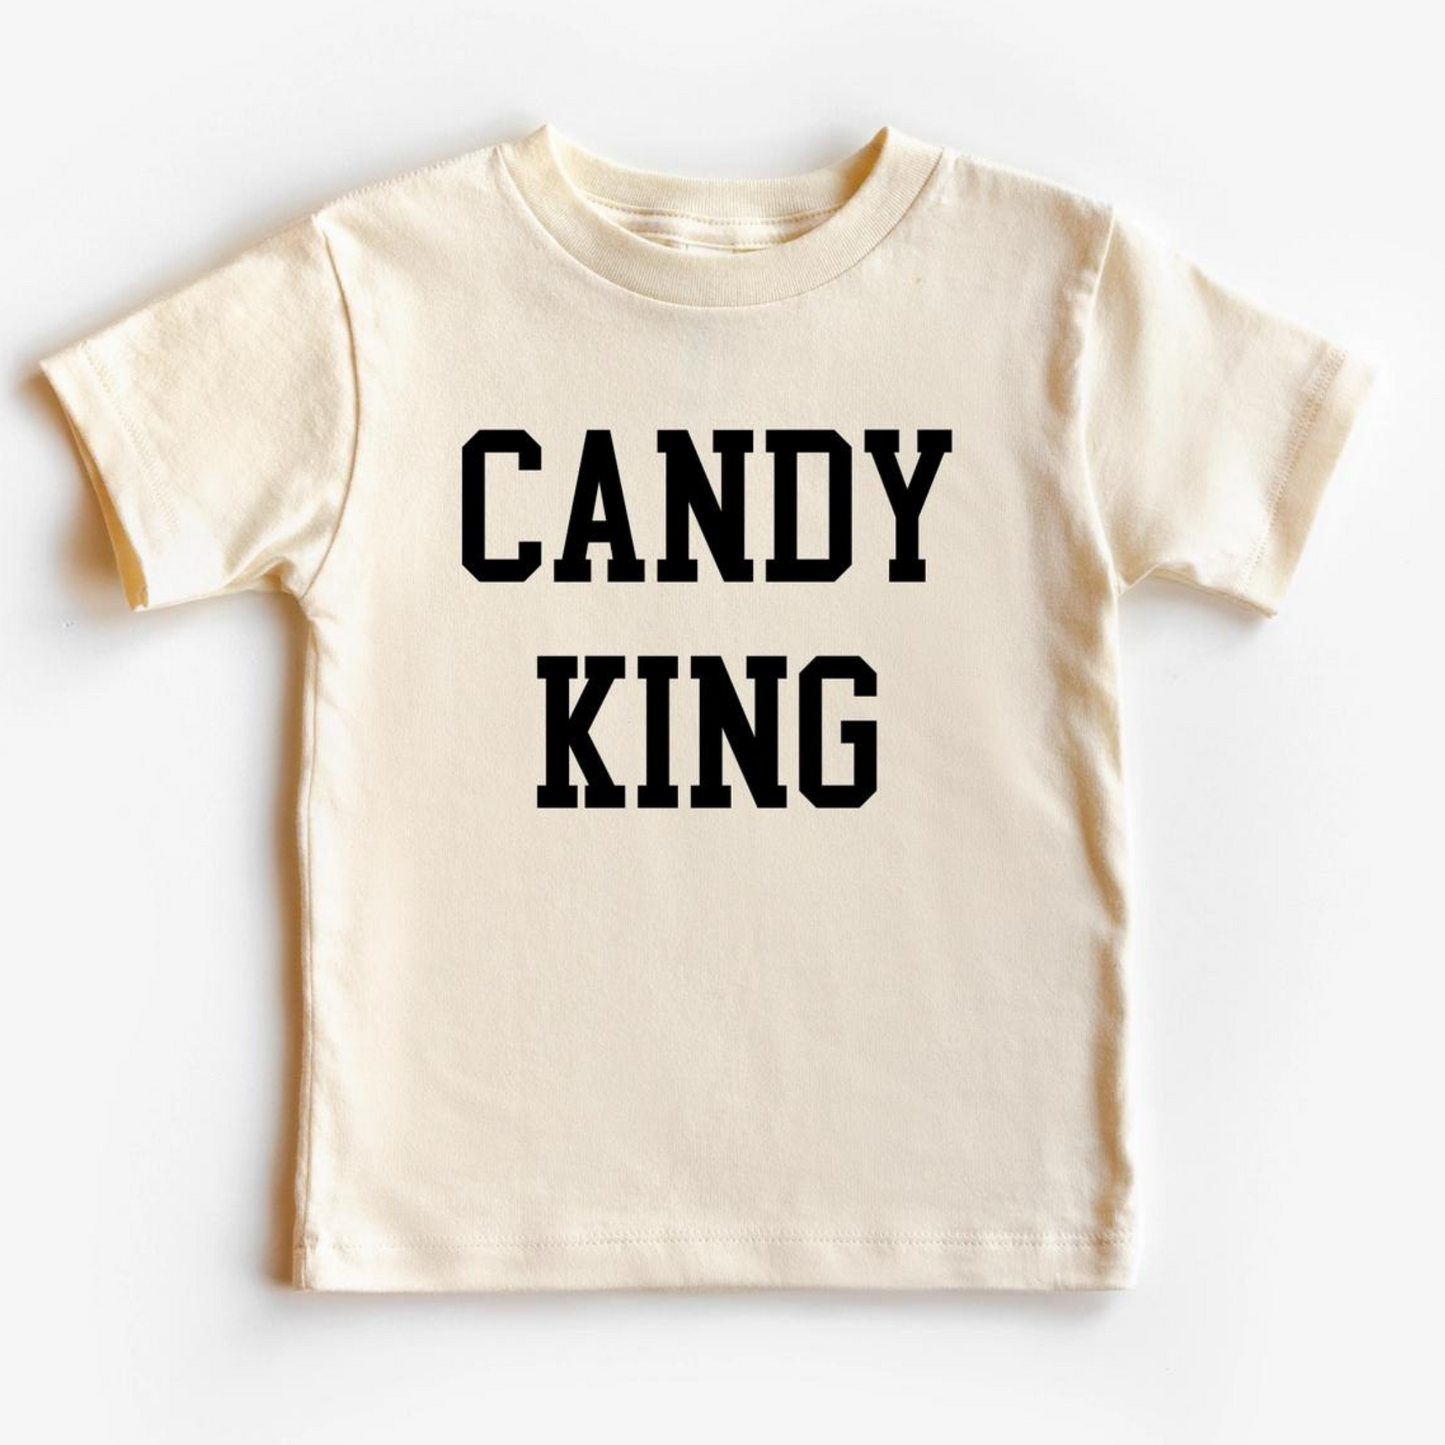 Kid's Graphic Short Sleeve Tee, Candy King